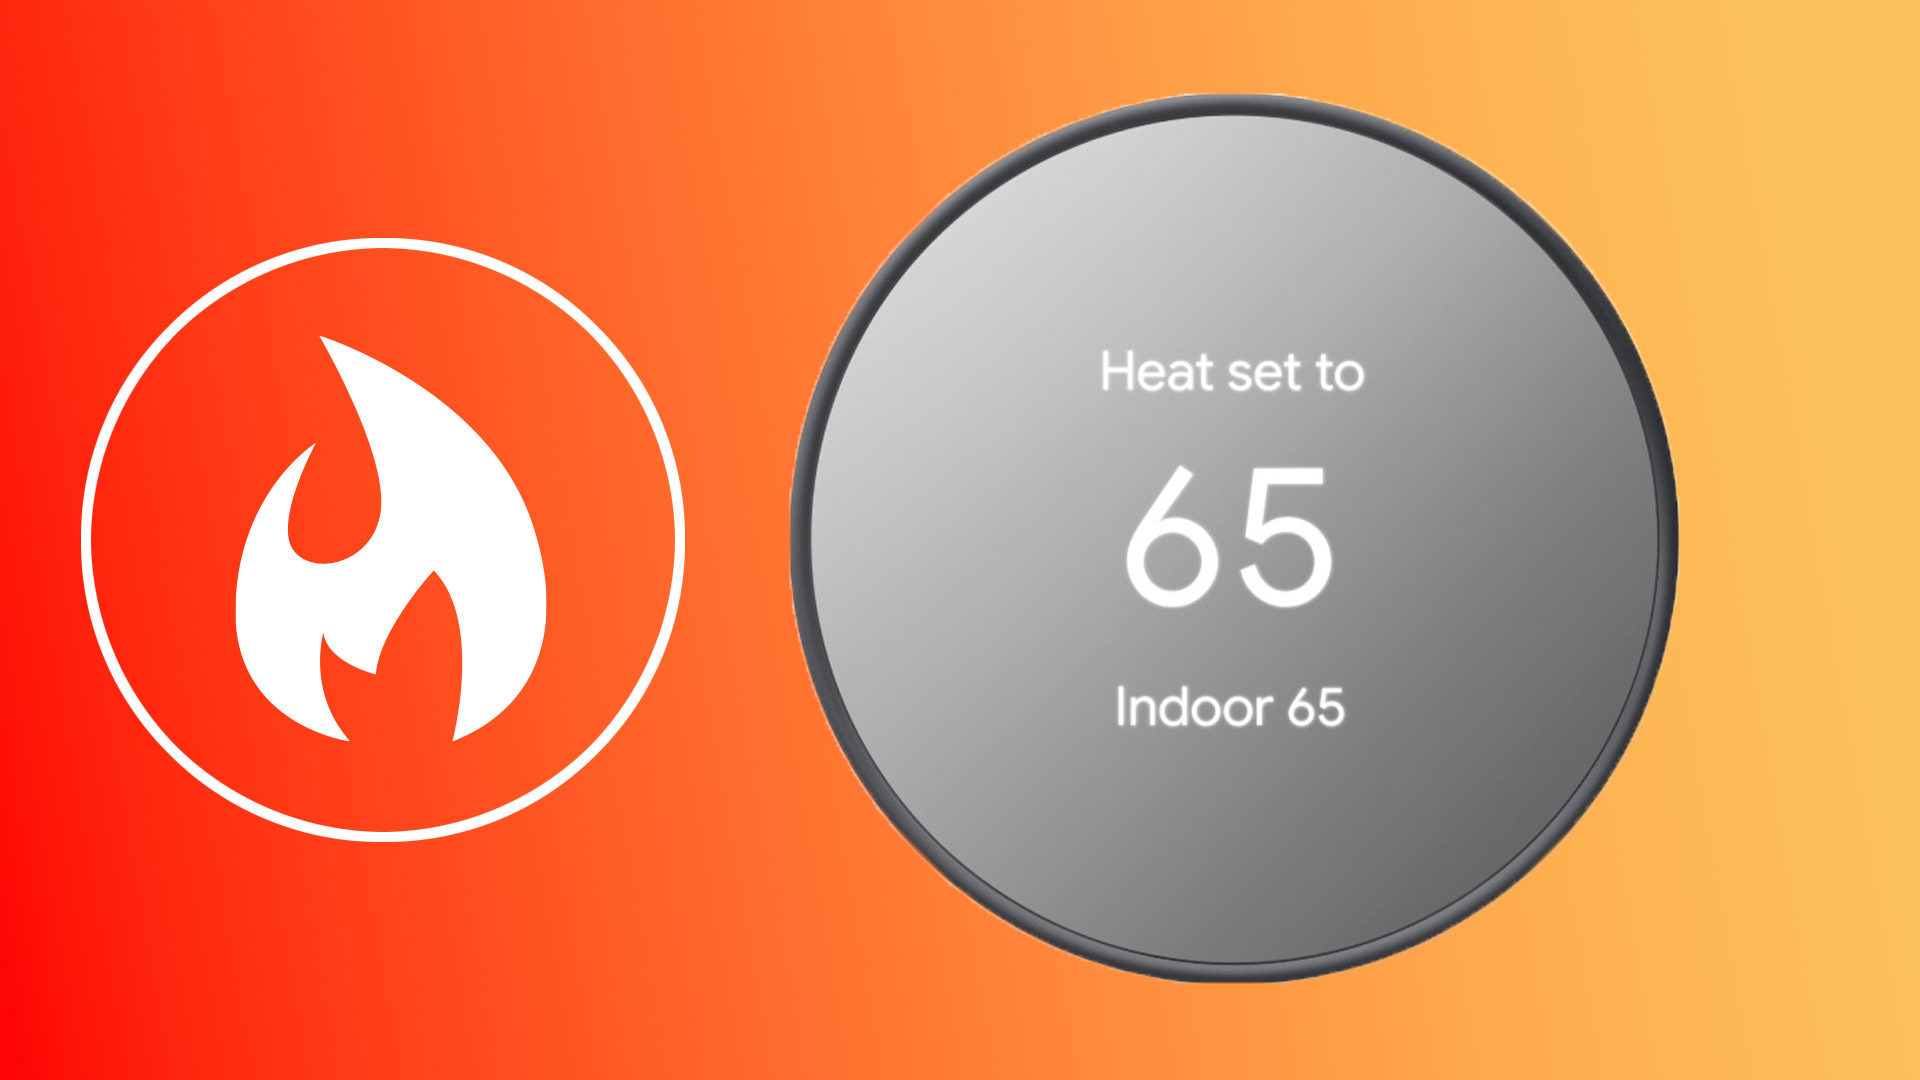 Google Nest Thermostat on an orange background with a flame symbol